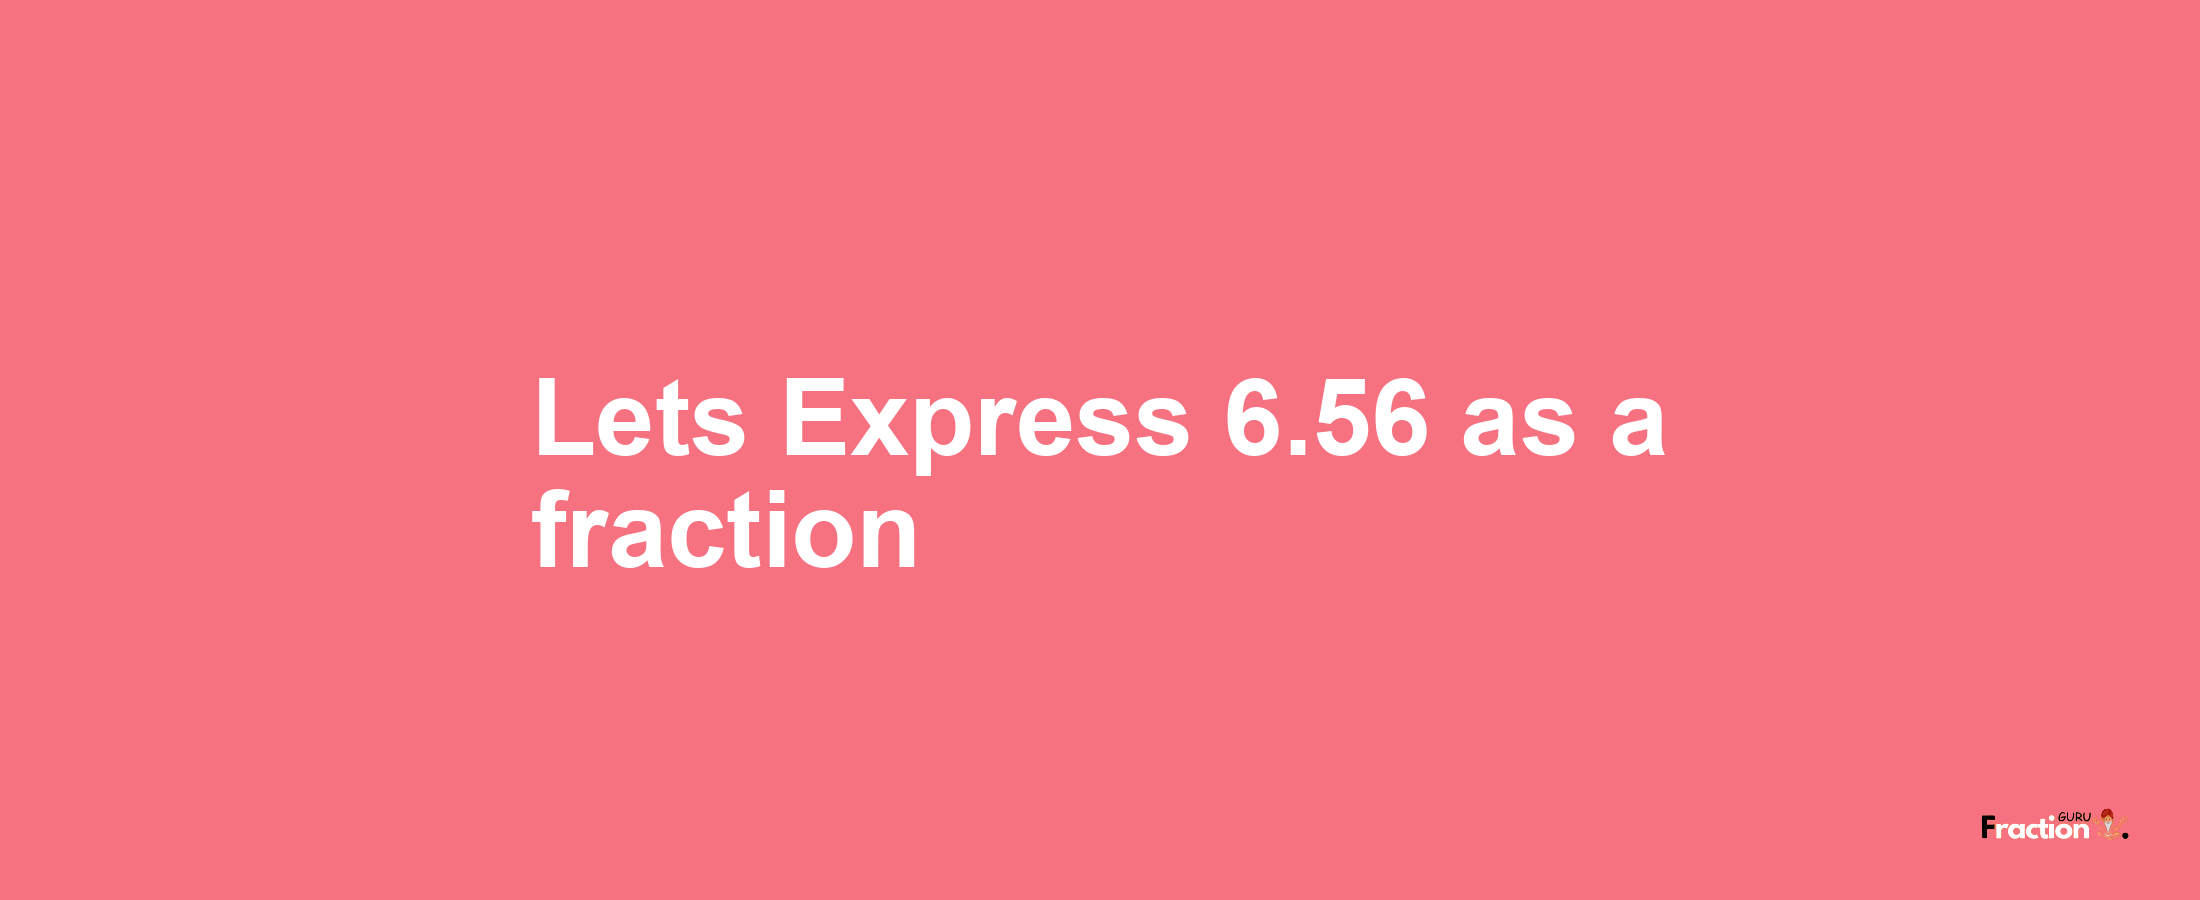 Lets Express 6.56 as afraction